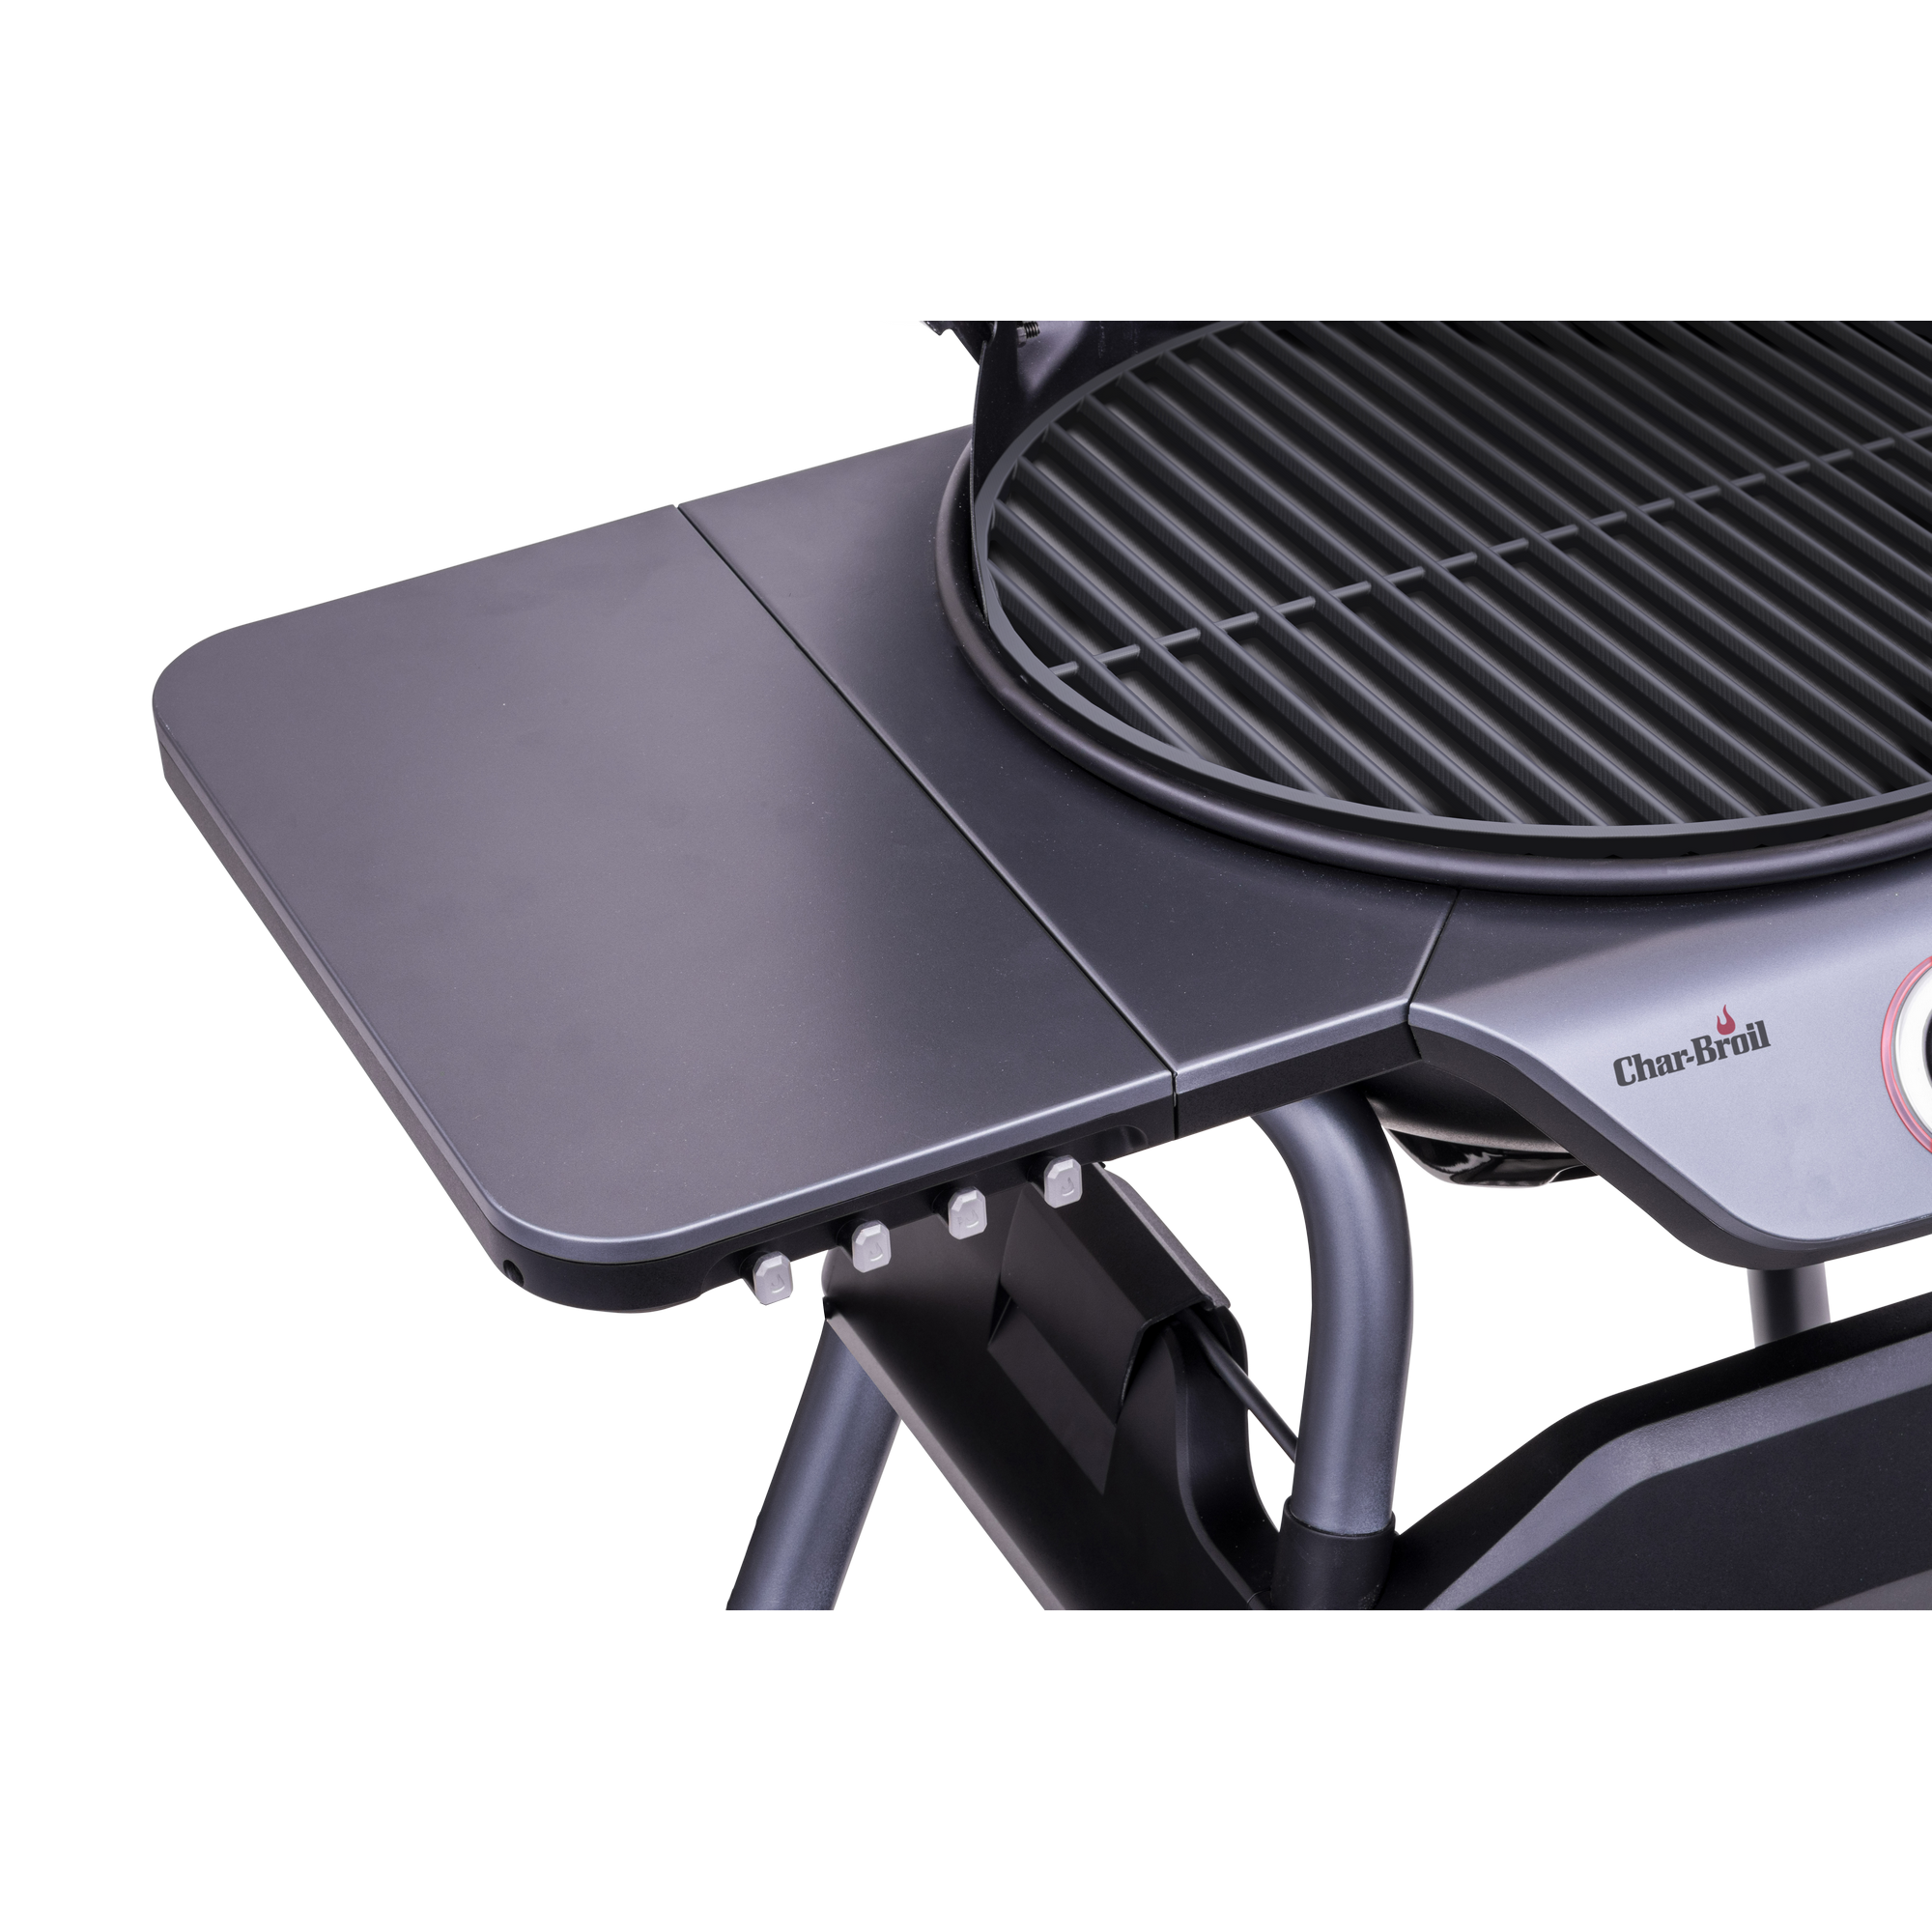 Elektrogrill 'All-Star 120 electric' schwarz Ø 45 cm + product picture